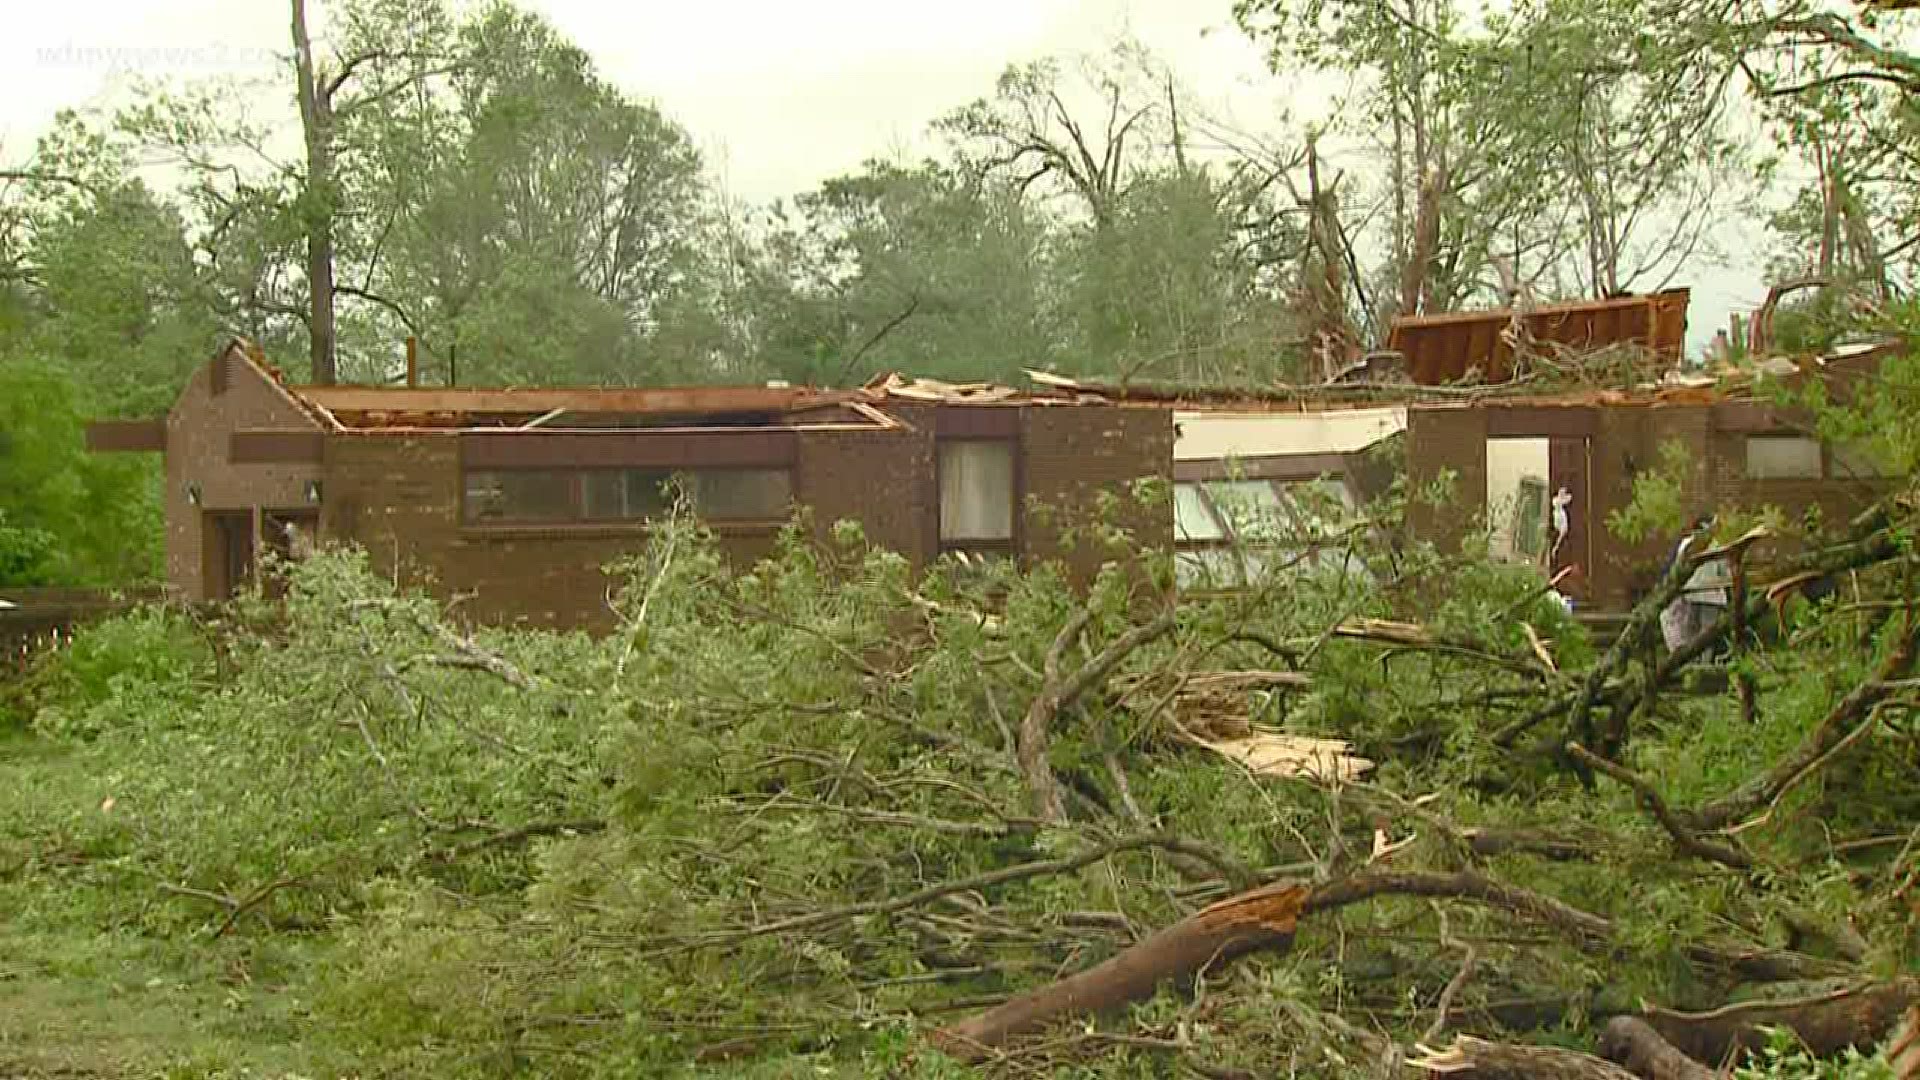 National Weather Service confirms the tornado that touched down in Alamance County was at least an EF-1. That means it had winds of at least 100 mph.